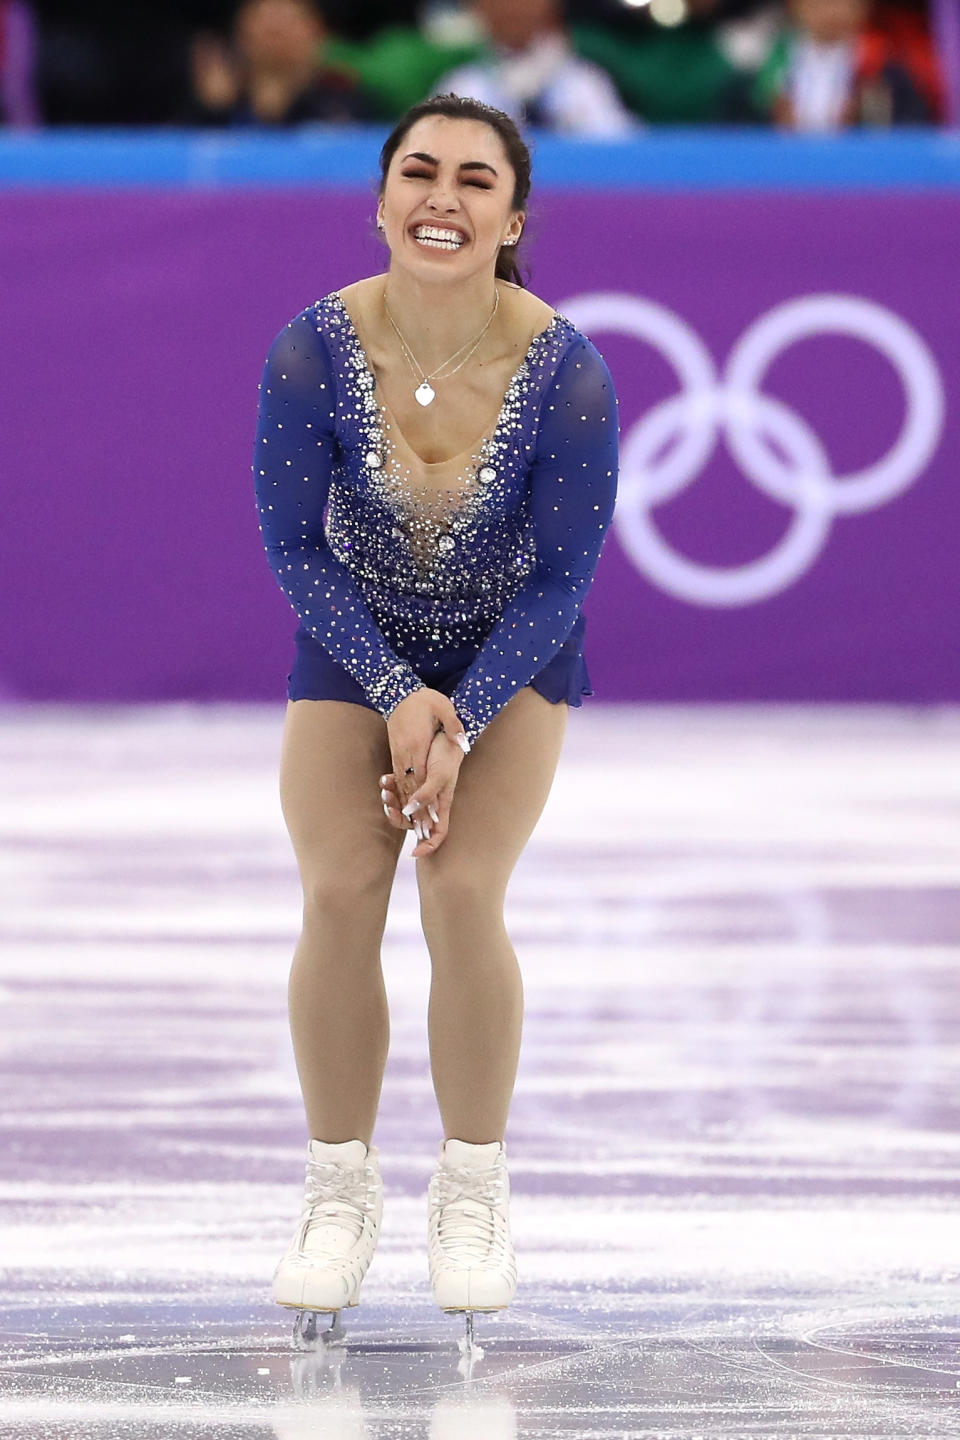 <p>Gabrielle Daleman of Canada reacts after her routine in the Figure Skating Team Event ? Ladies? Single Free Skating on day three of the PyeongChang 2018 Winter Olympic Games at Gangneung Ice Arena on February 12, 2018 in Gangneung, South Korea. (Photo by Jamie Squire/Getty Images) </p>